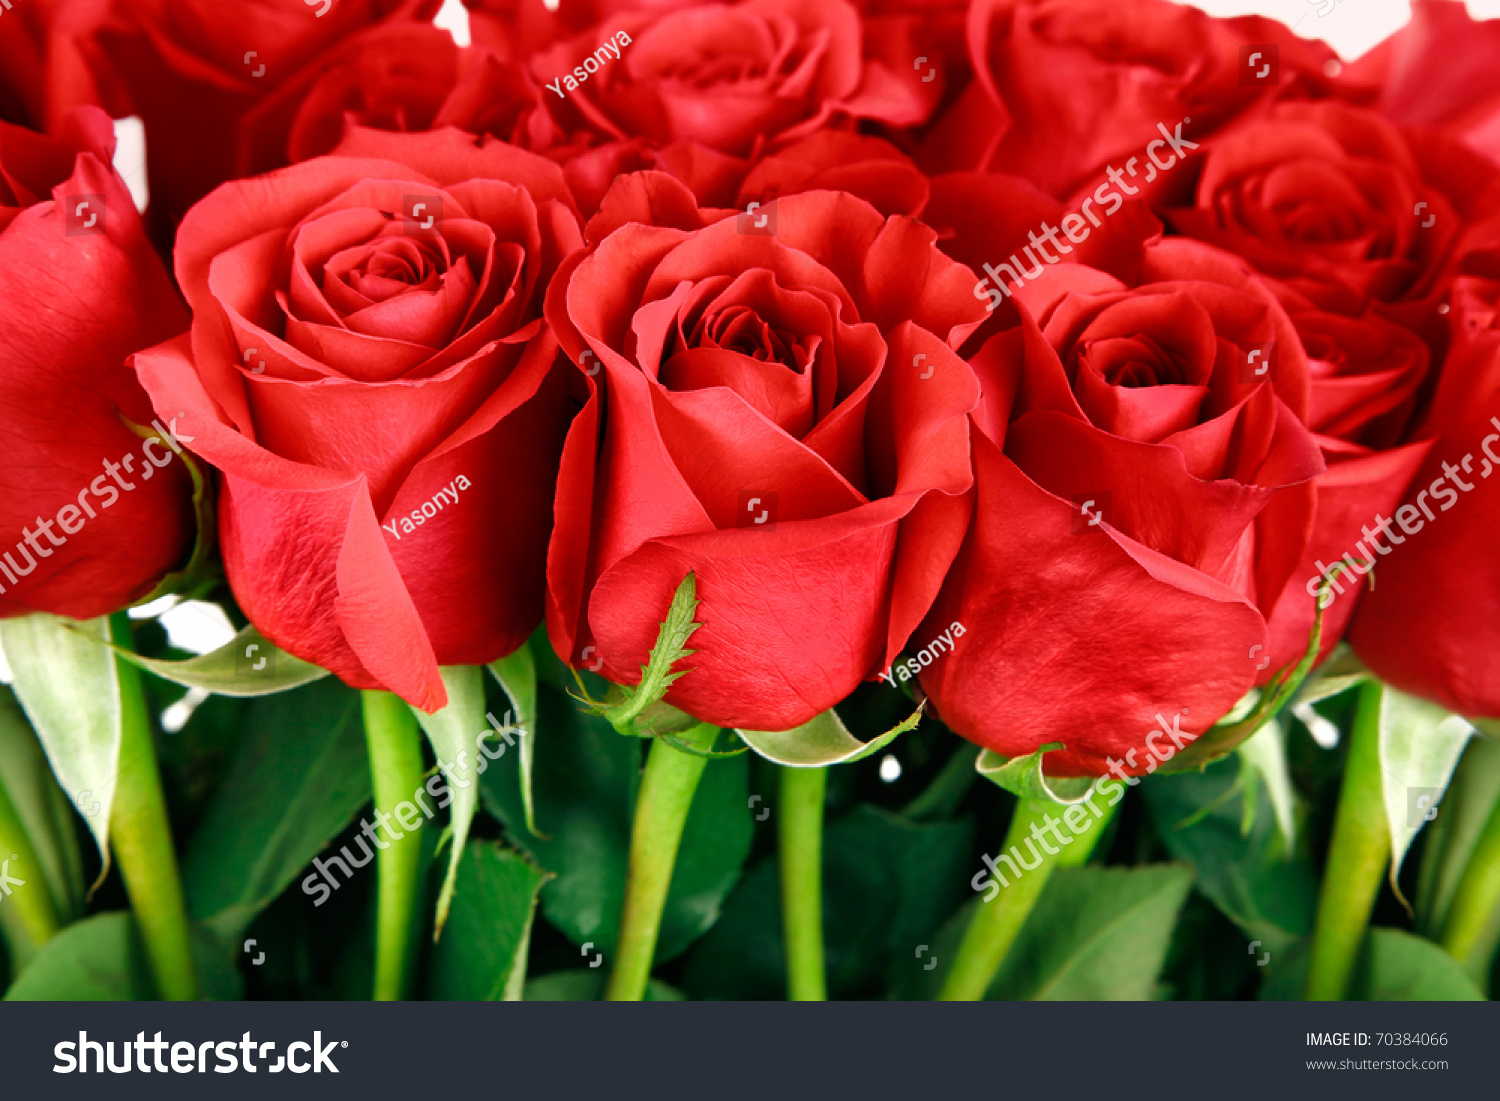 Bouquet Of Red Roses Buds Macro Close-Up Stock Photo 70384066 ...